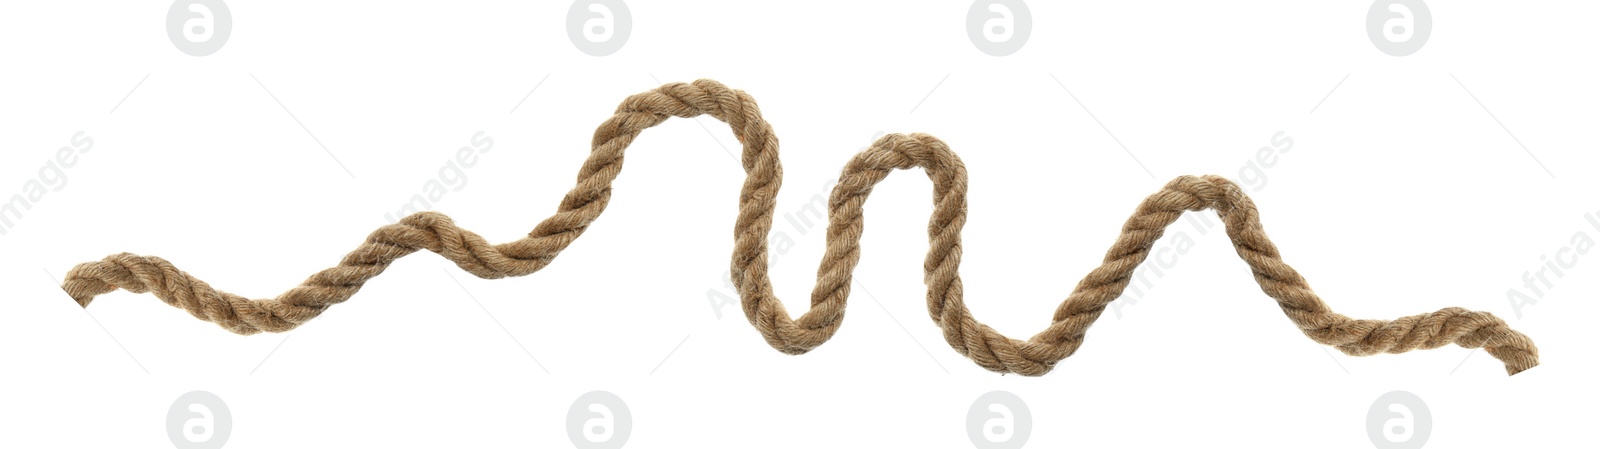 Image of Durable hemp rope on white background, top view